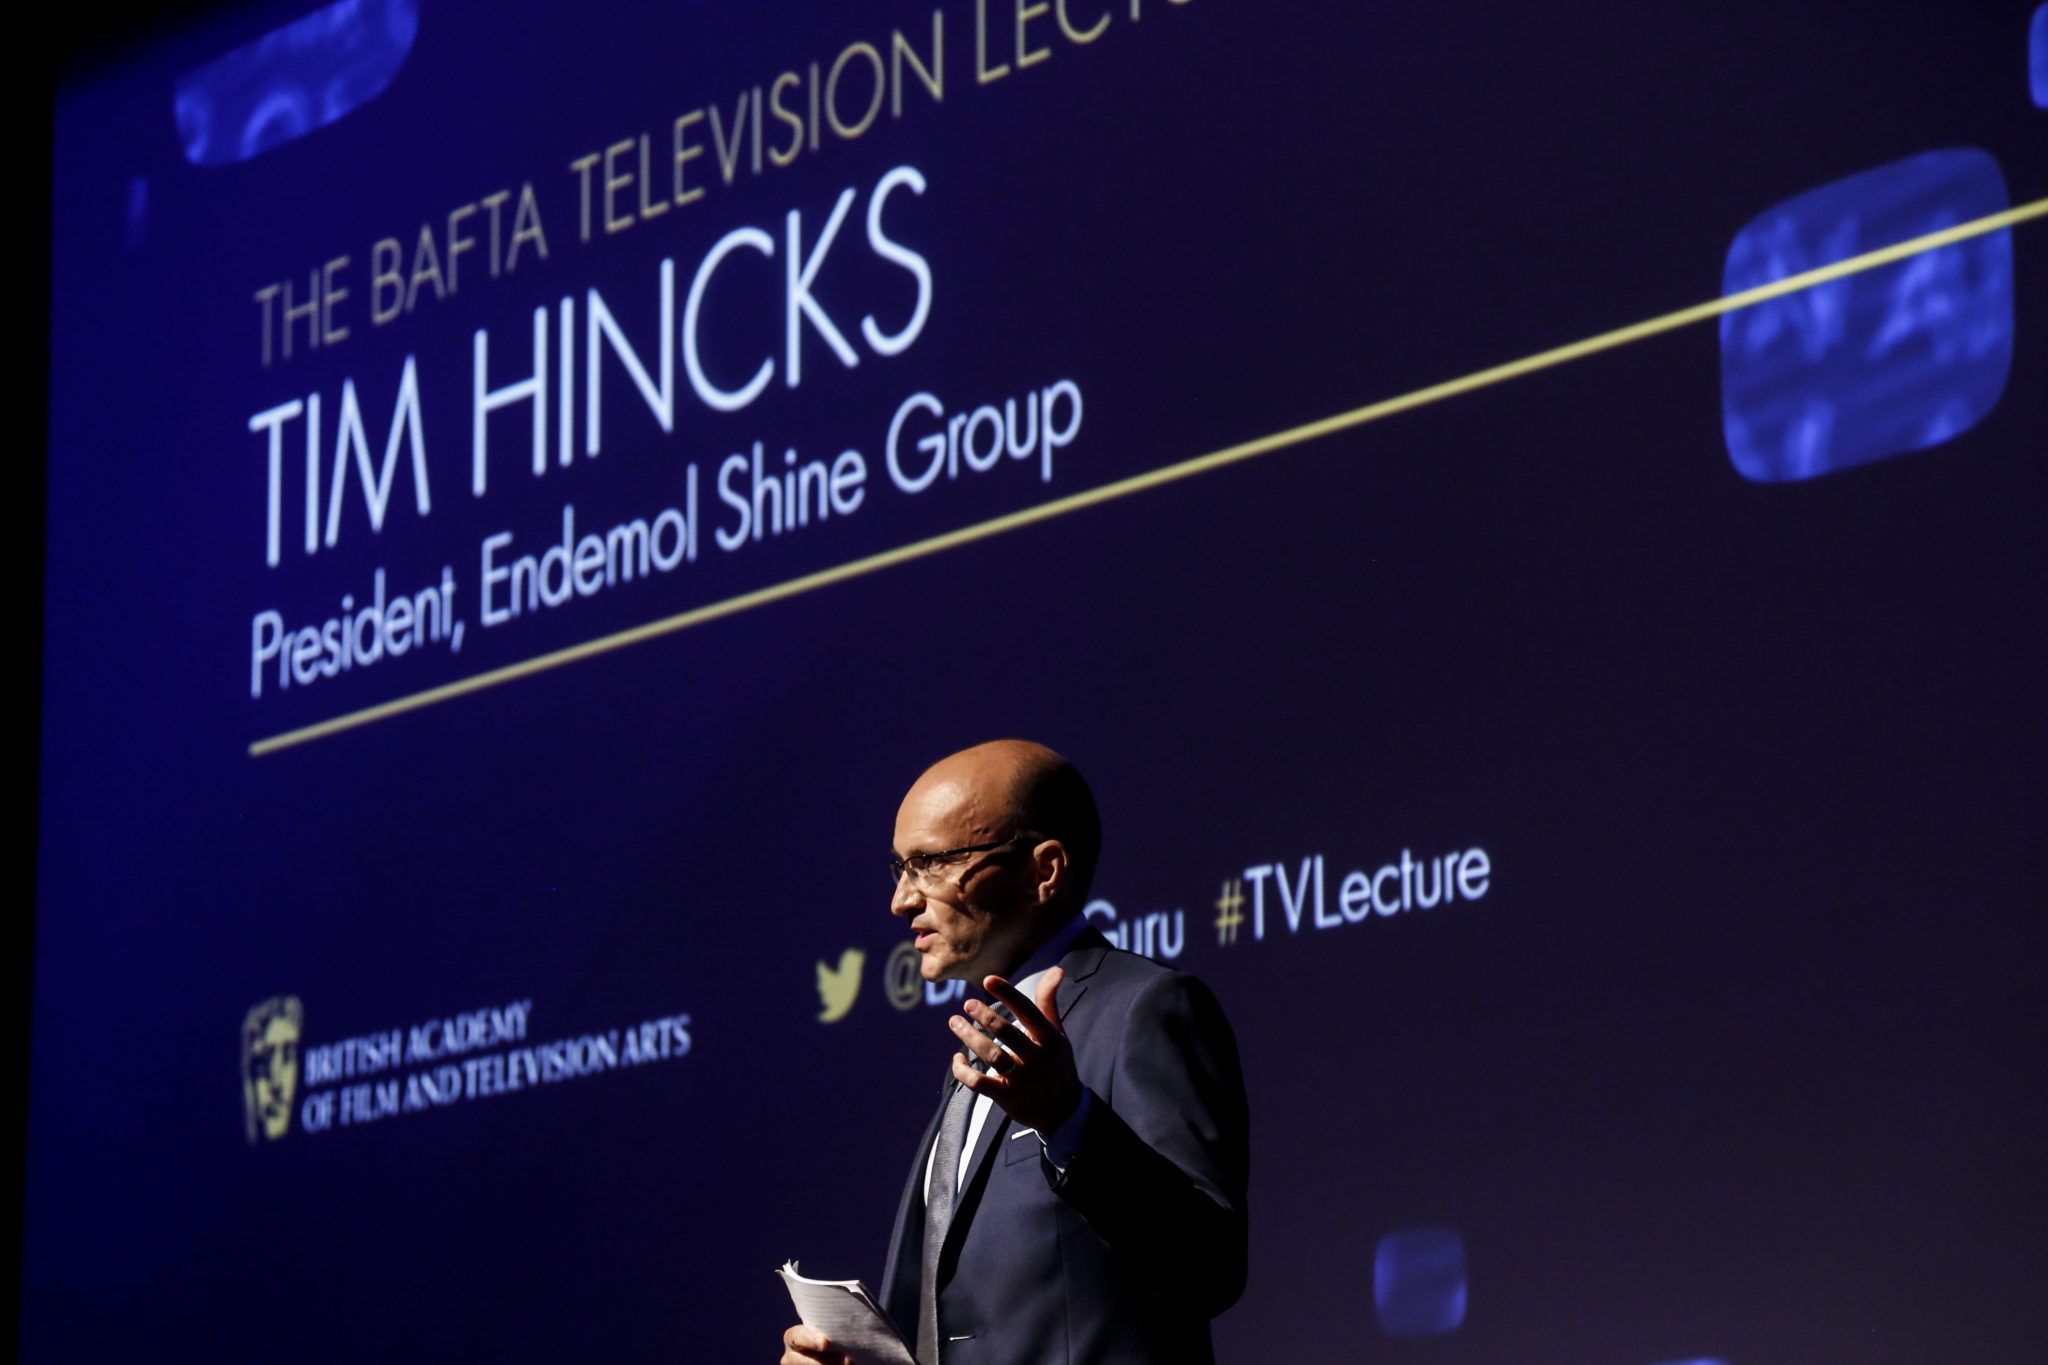 Event: Annual Television Lecture given by Tim Hincks Date: Tuesday 30 June, 2015 Venue: BAFTA, 195 Piccadilly Host: Steve Hewlett